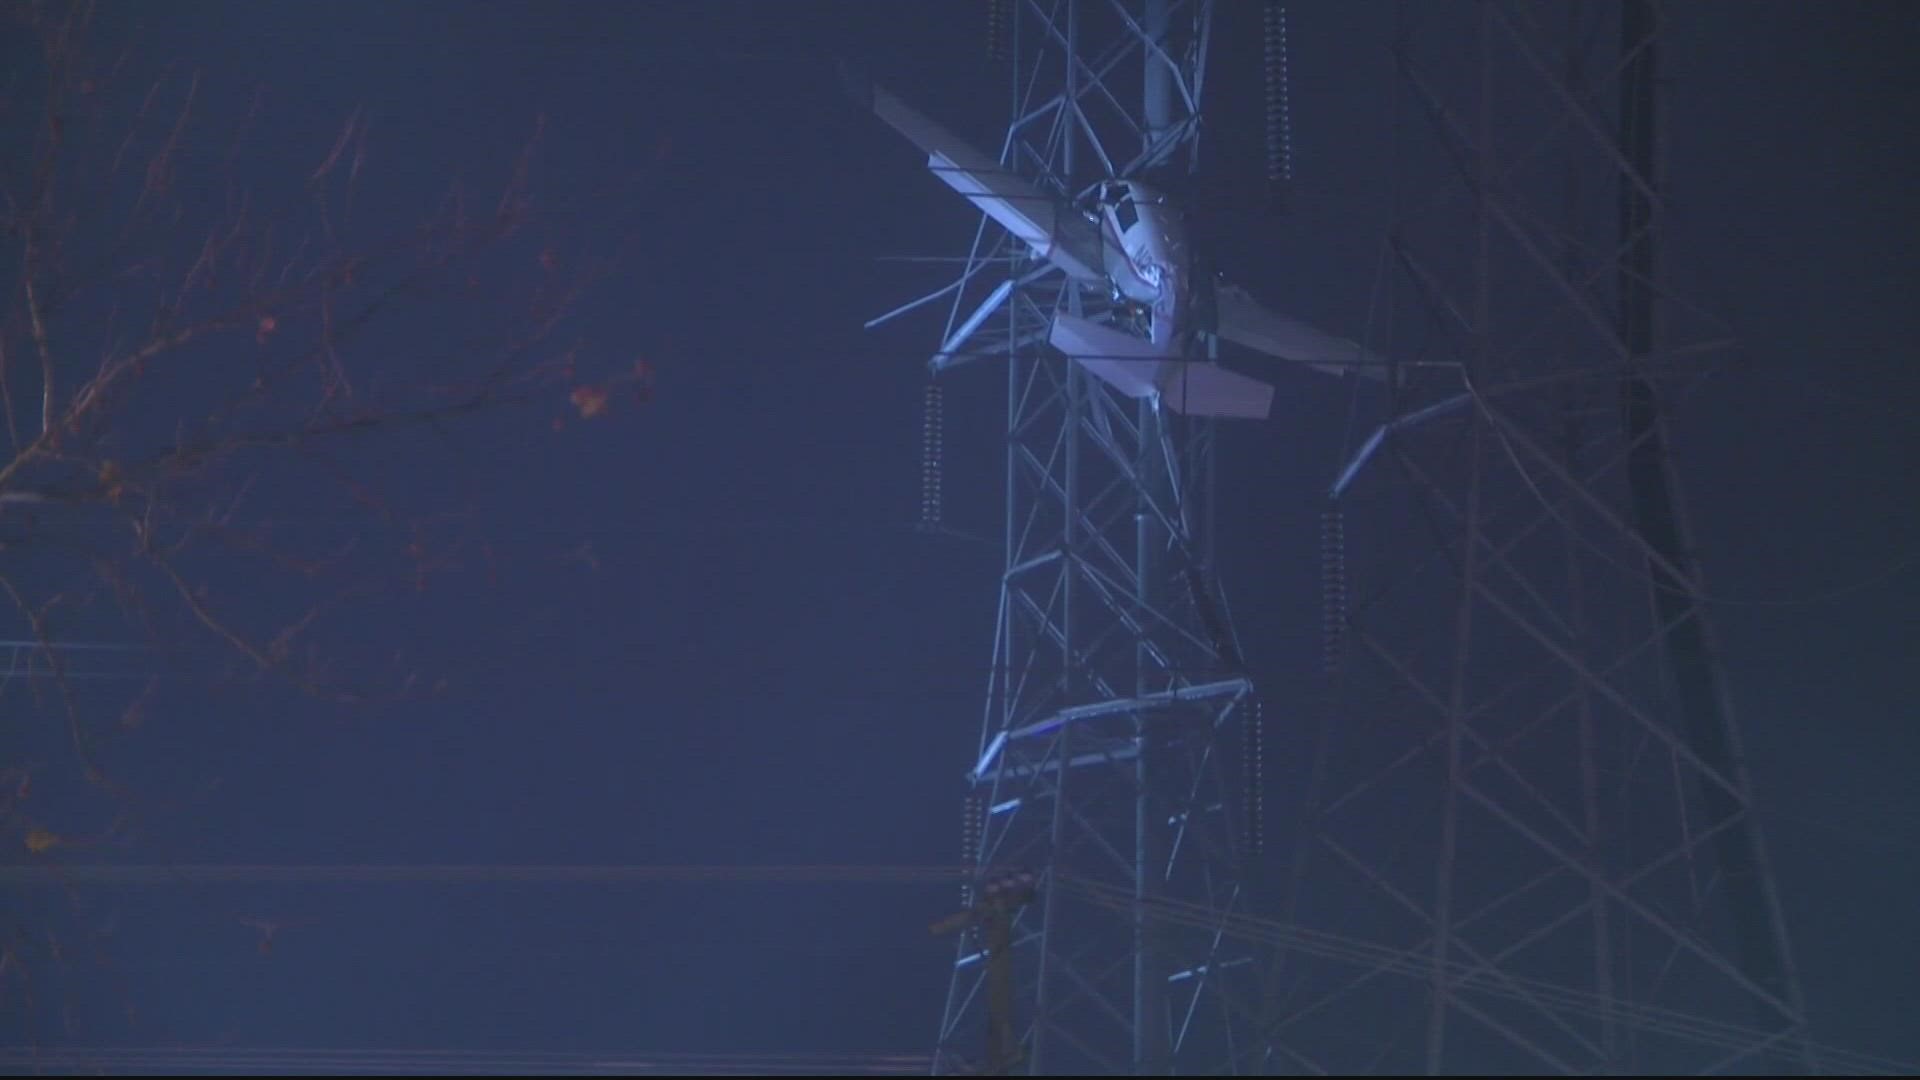 A day after two people were rescued from a plane caught in a transmission tower about 100 feet in the air in Montgomery Co., the initial 911 call has been released.